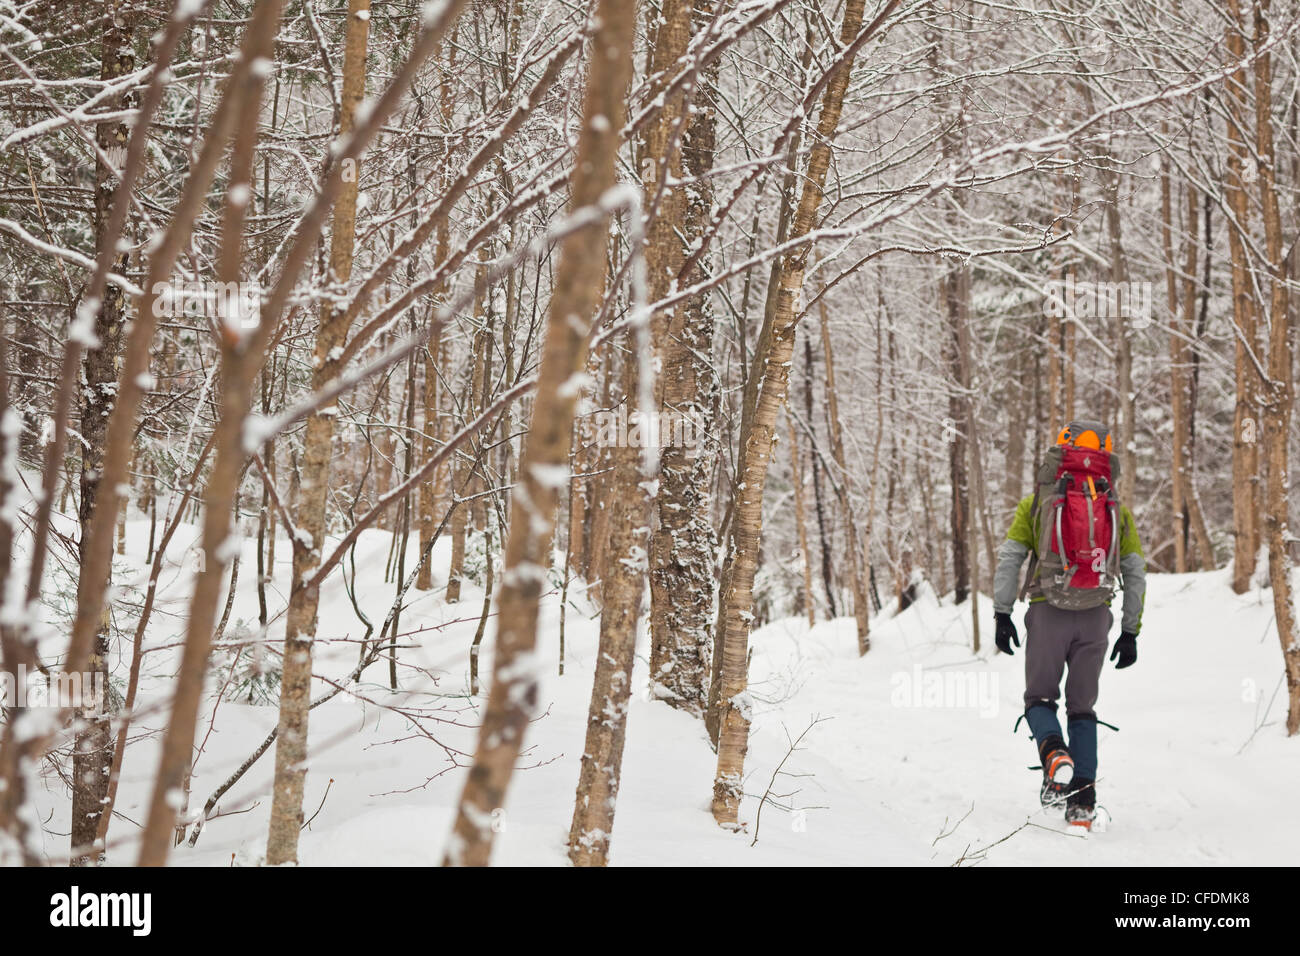 A young man hiking through the forest to go ice climbing for the day, near St Raymond, Quebec, Canada Stock Photo